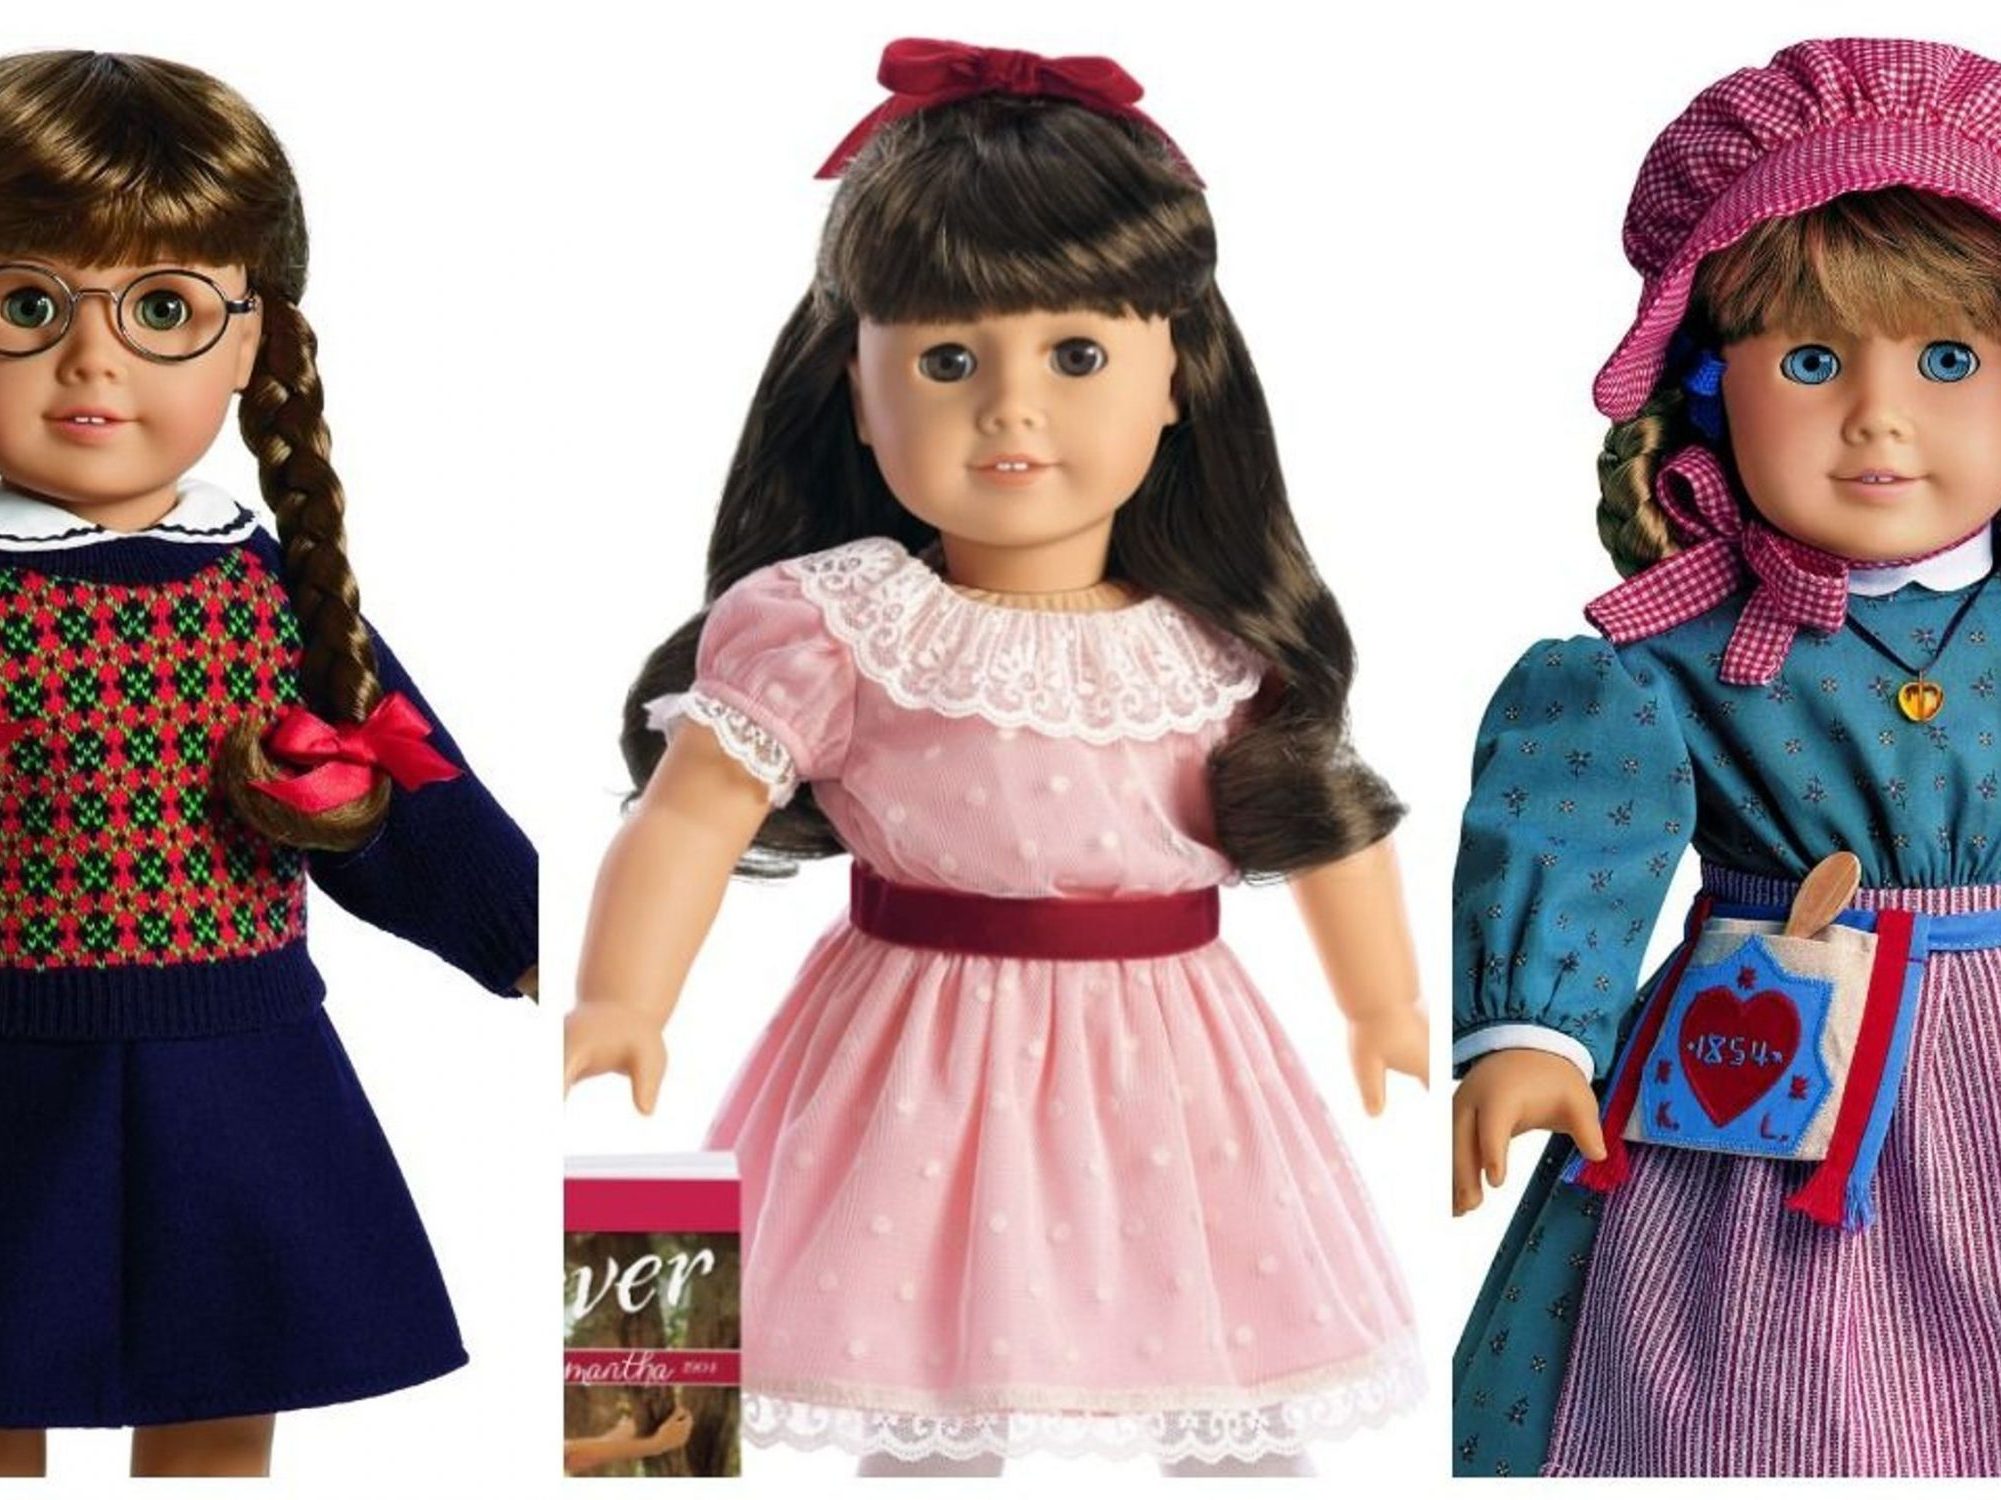 American Girl dolls to come alive in new live-action film.